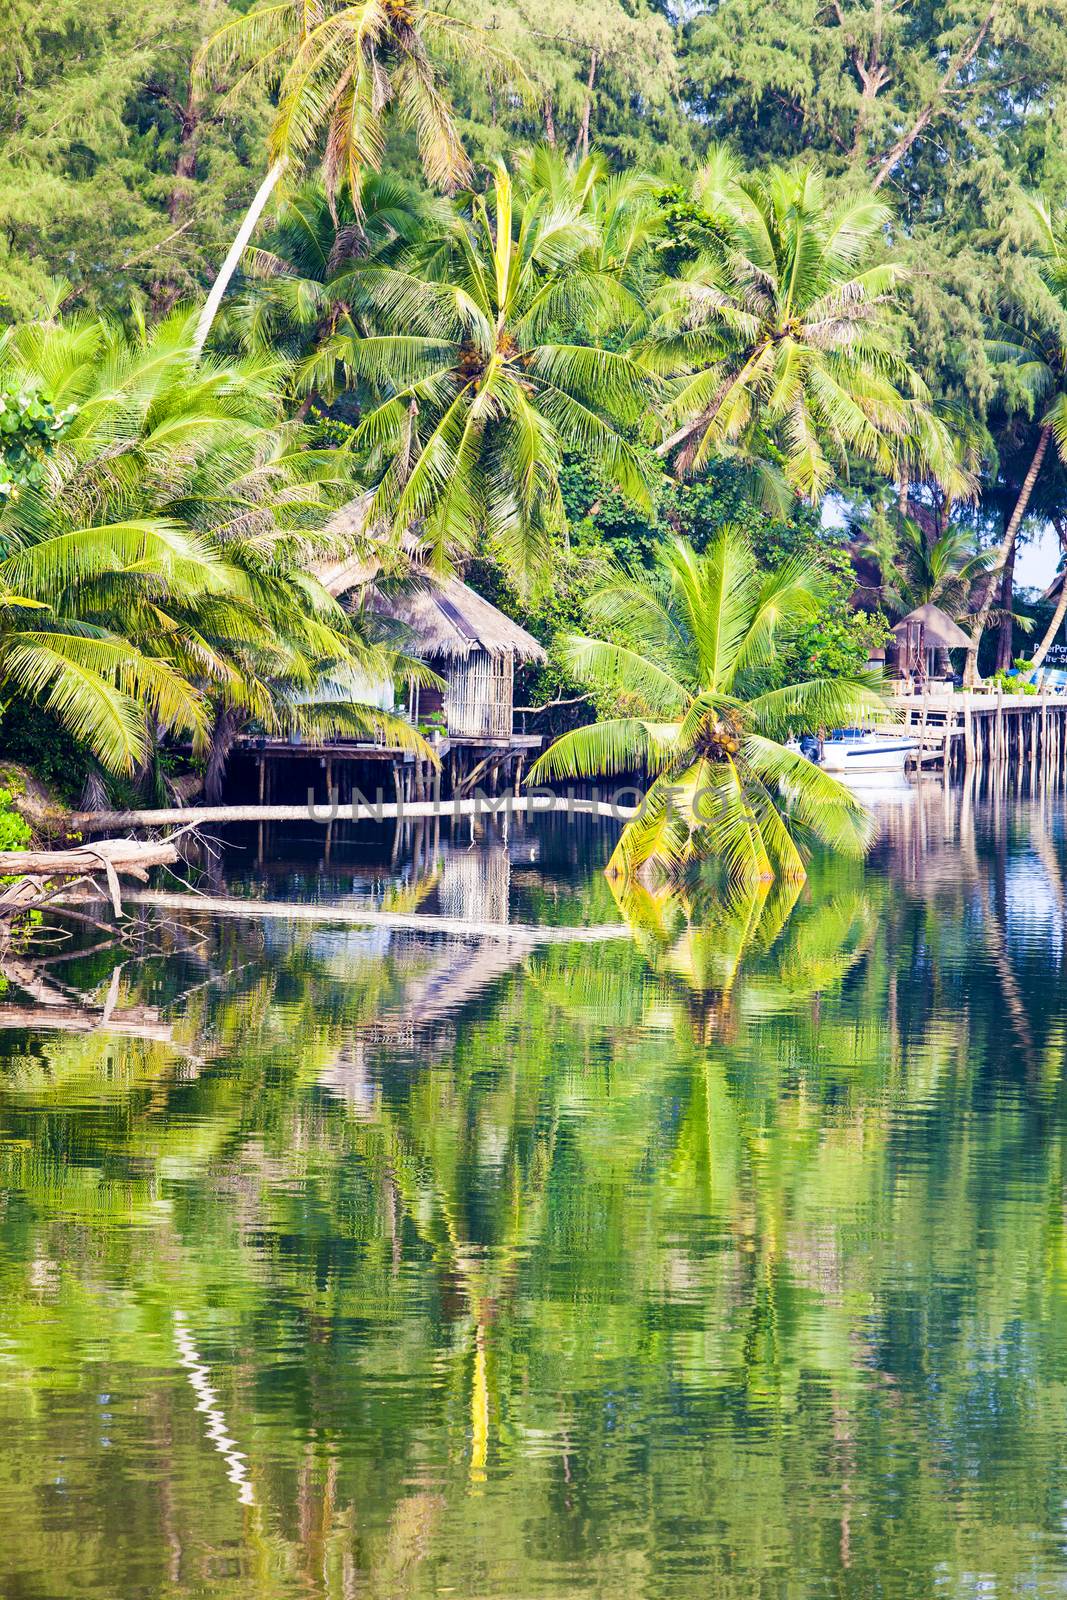 The resort in nature among the coconut trees.